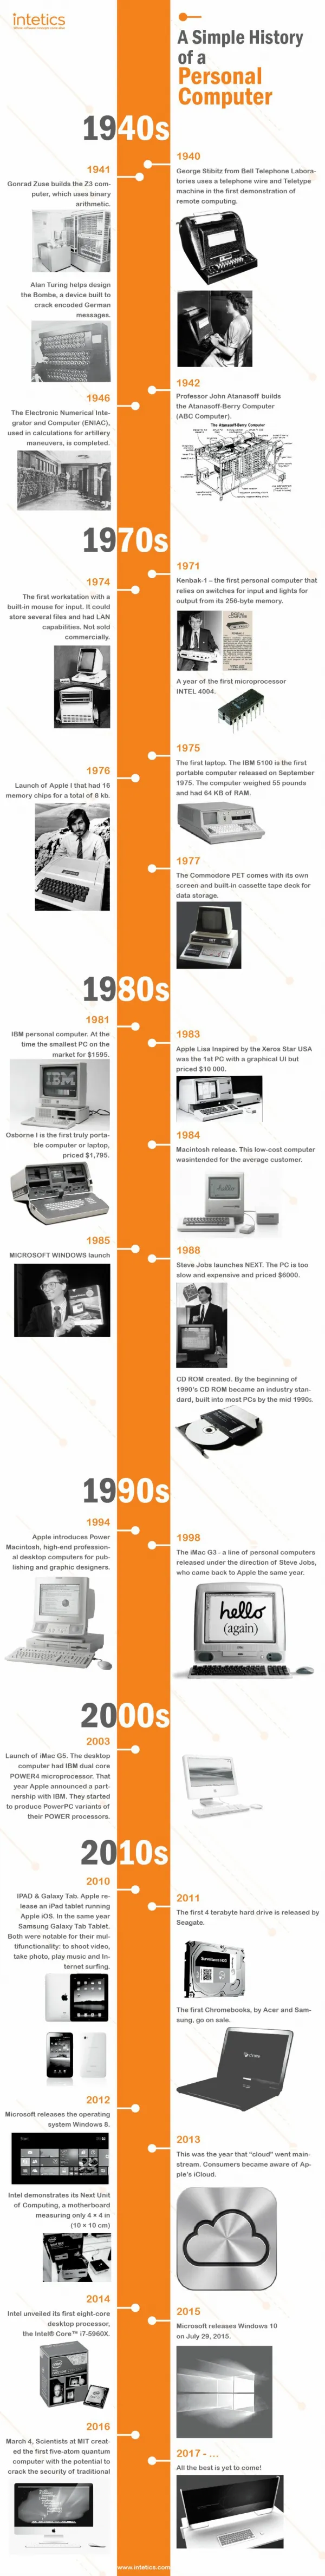 Simple History of a Personal Computer